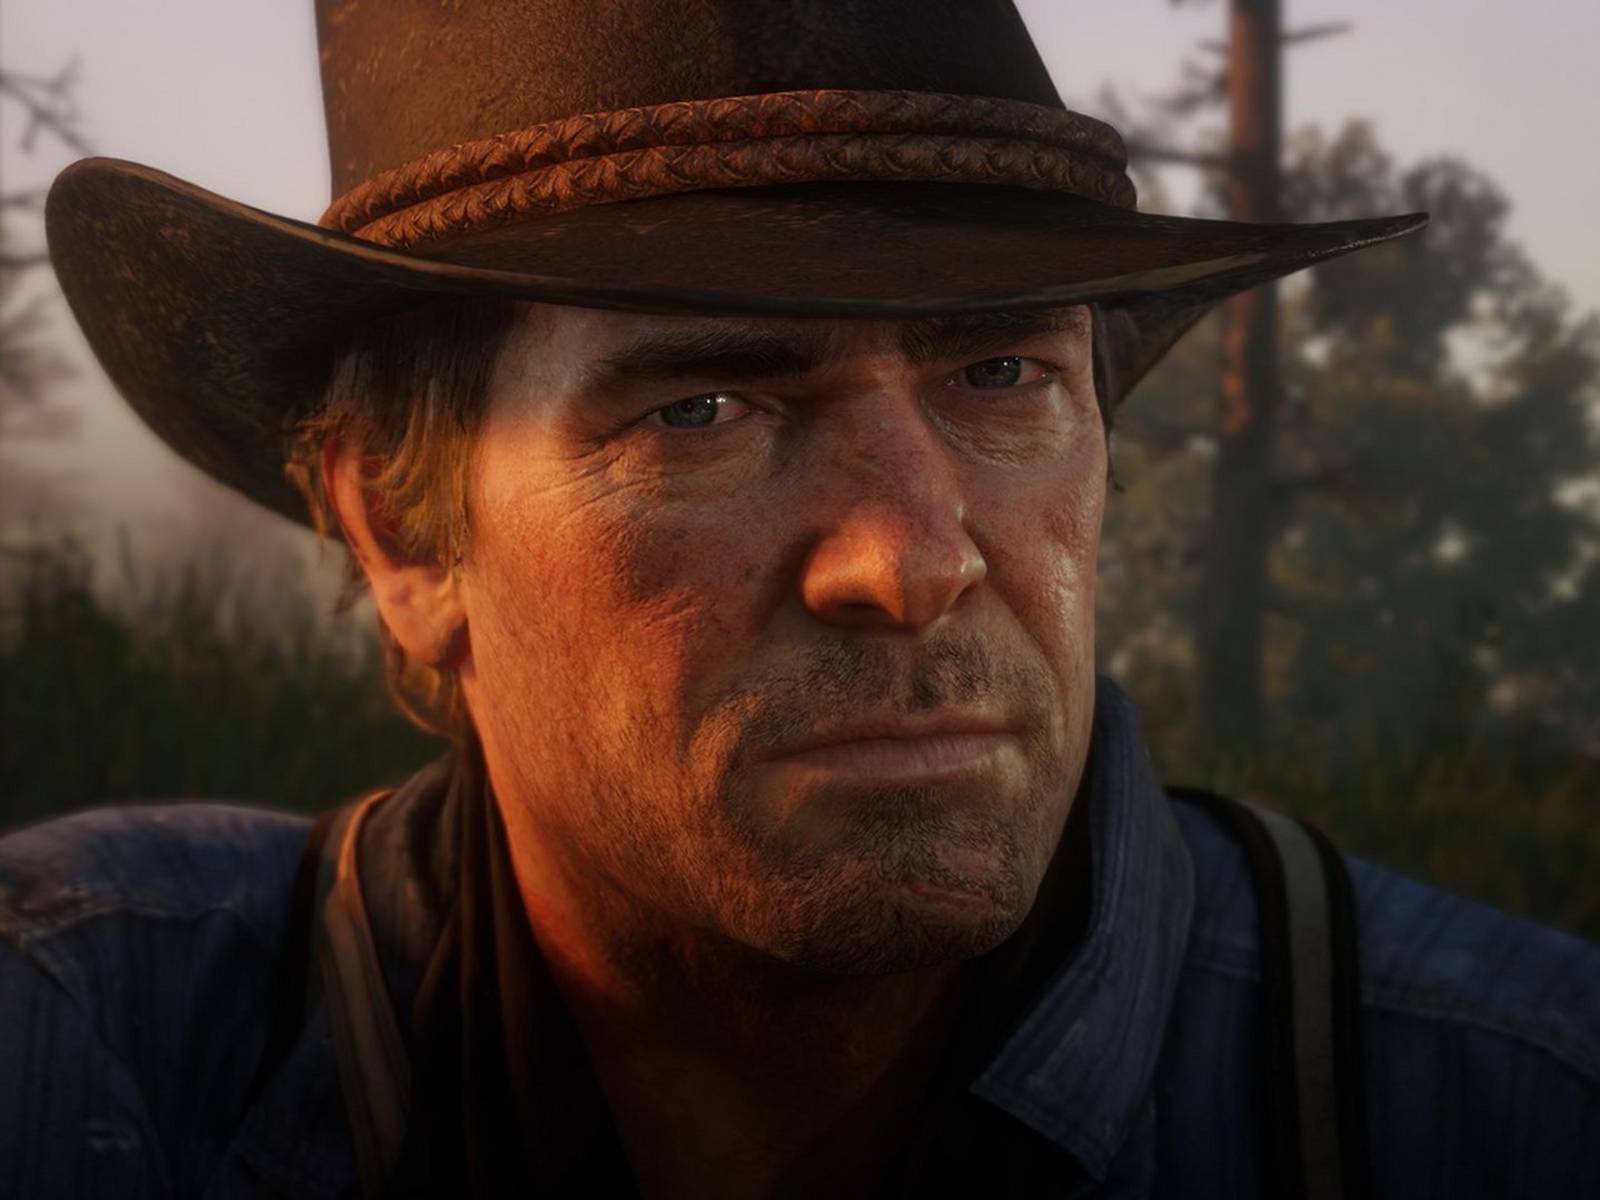 Red Dead Redemption 2 Interview: The Cultural Impact Of Arthur Morgan